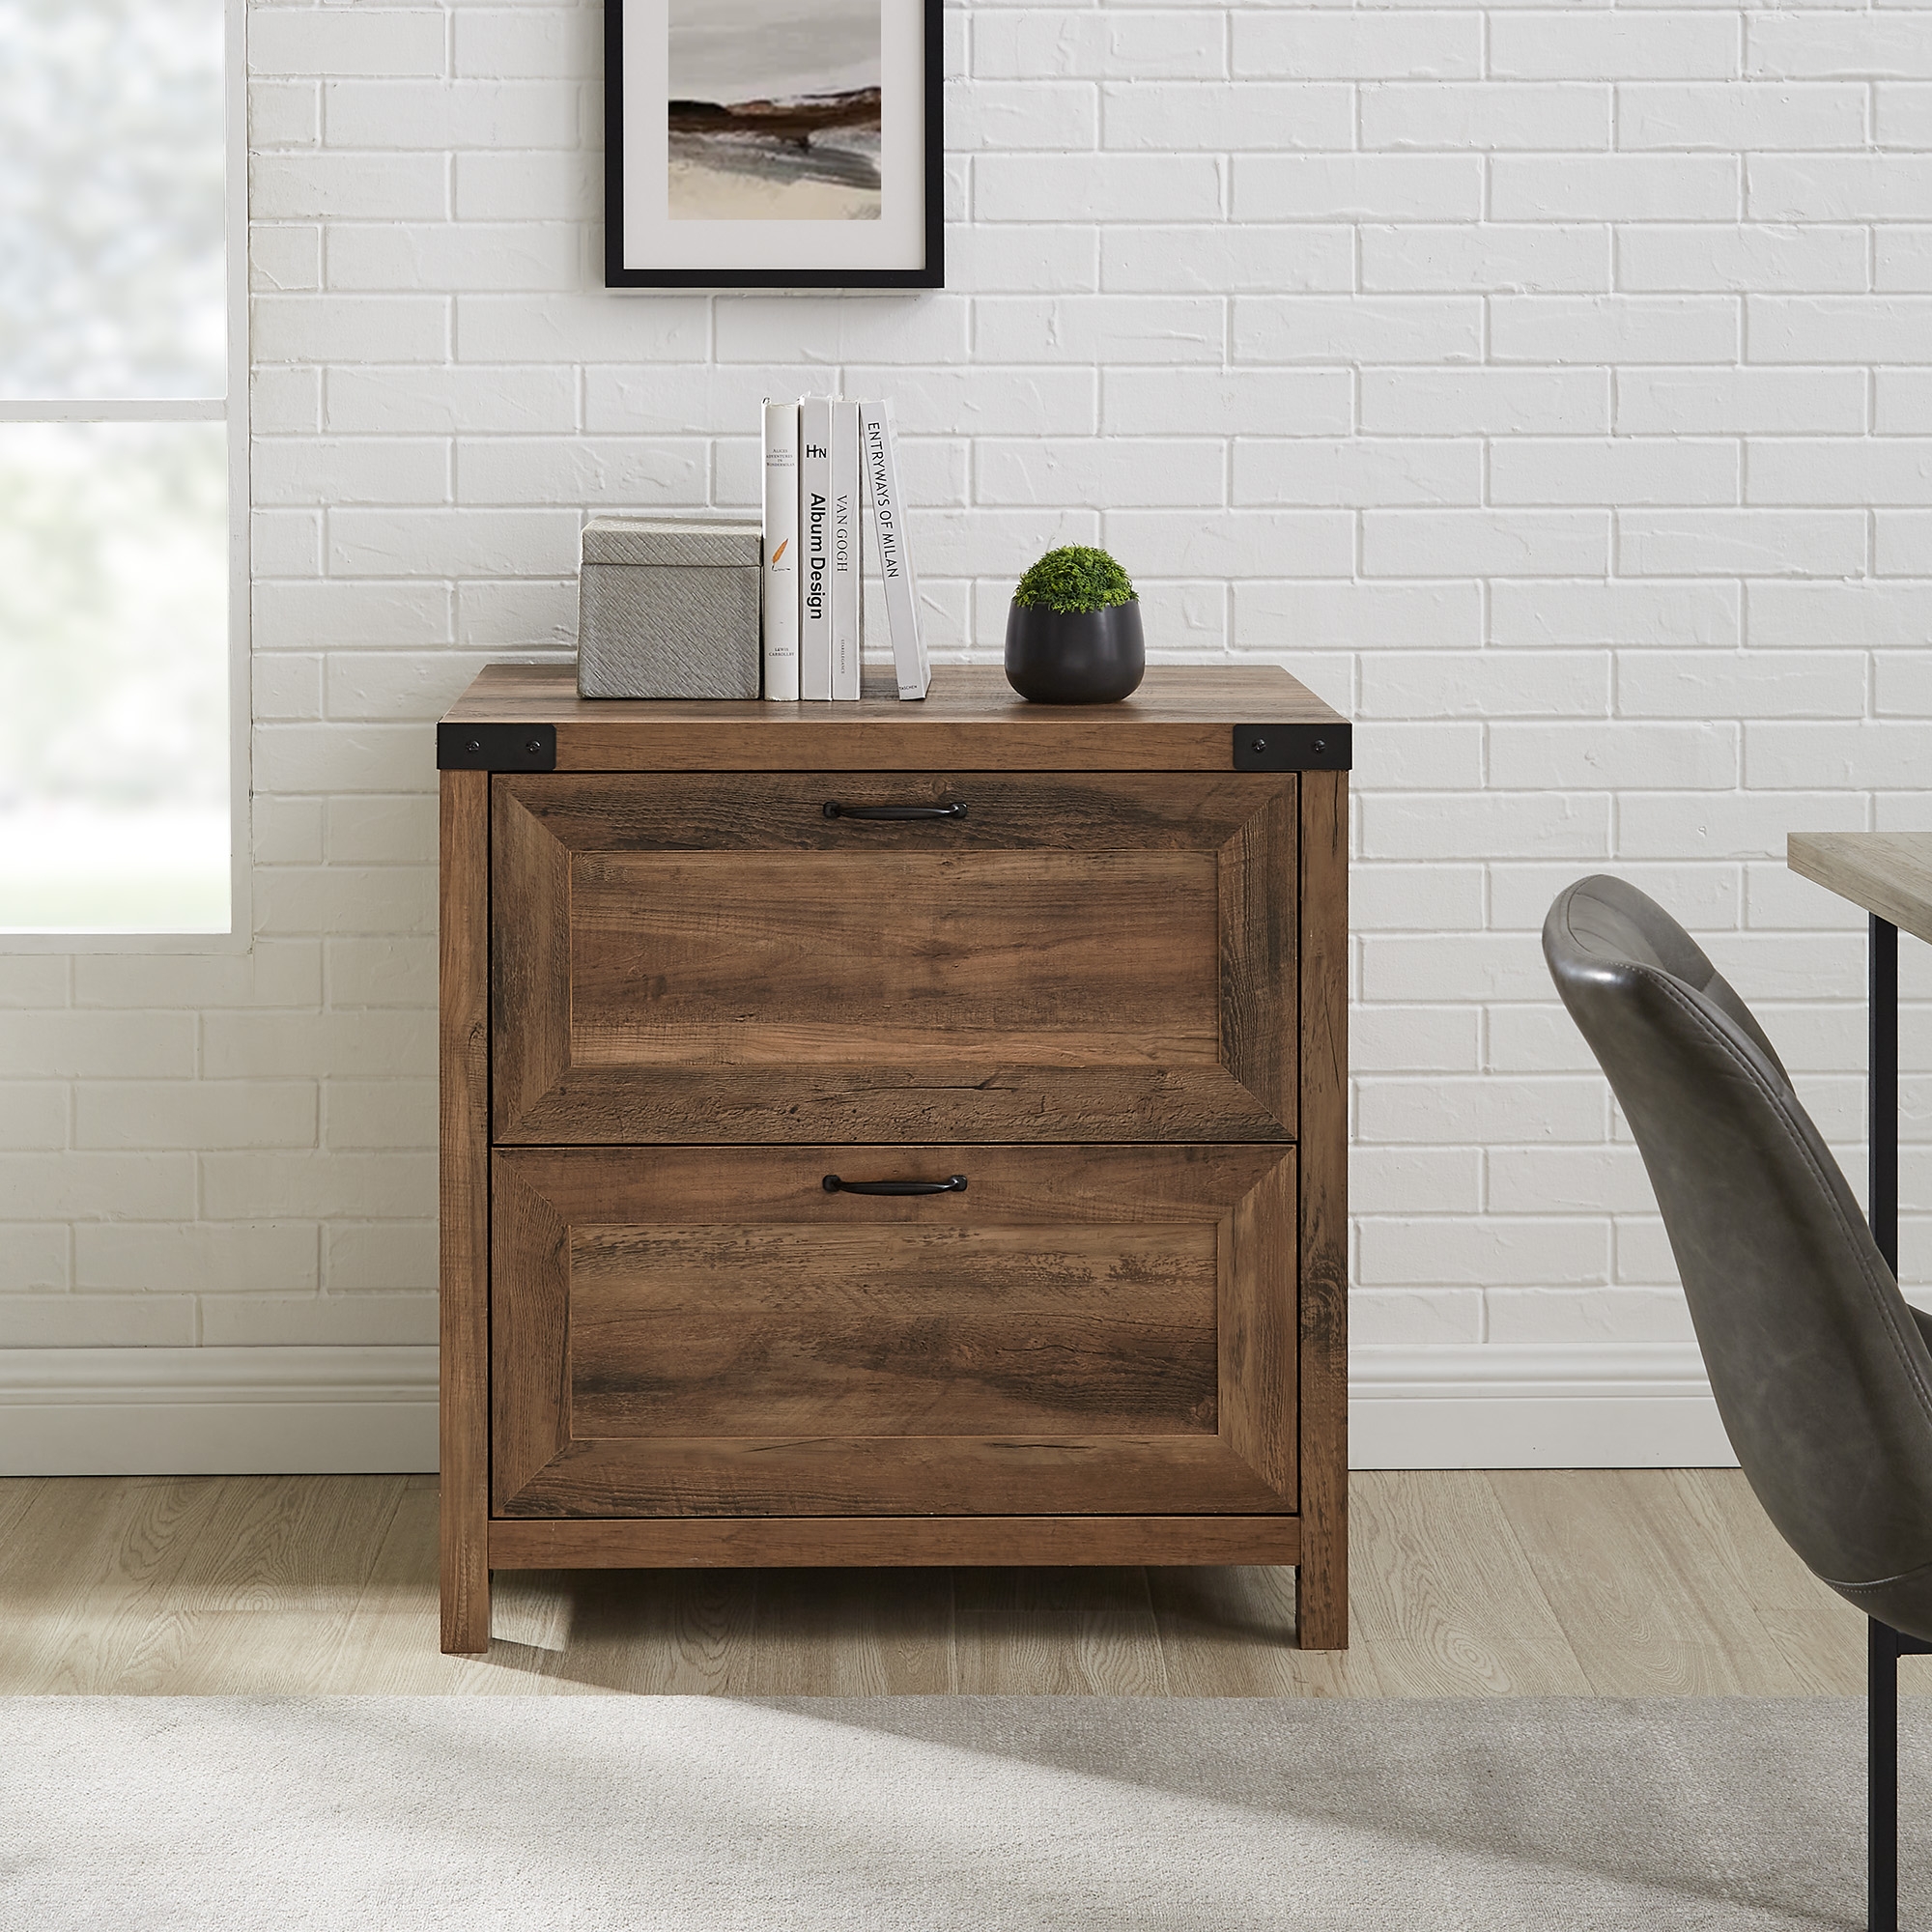 Modern Farmhouse 2-Drawer Filing Cabinet with Metal Accents – Rustic Oak - Image 5